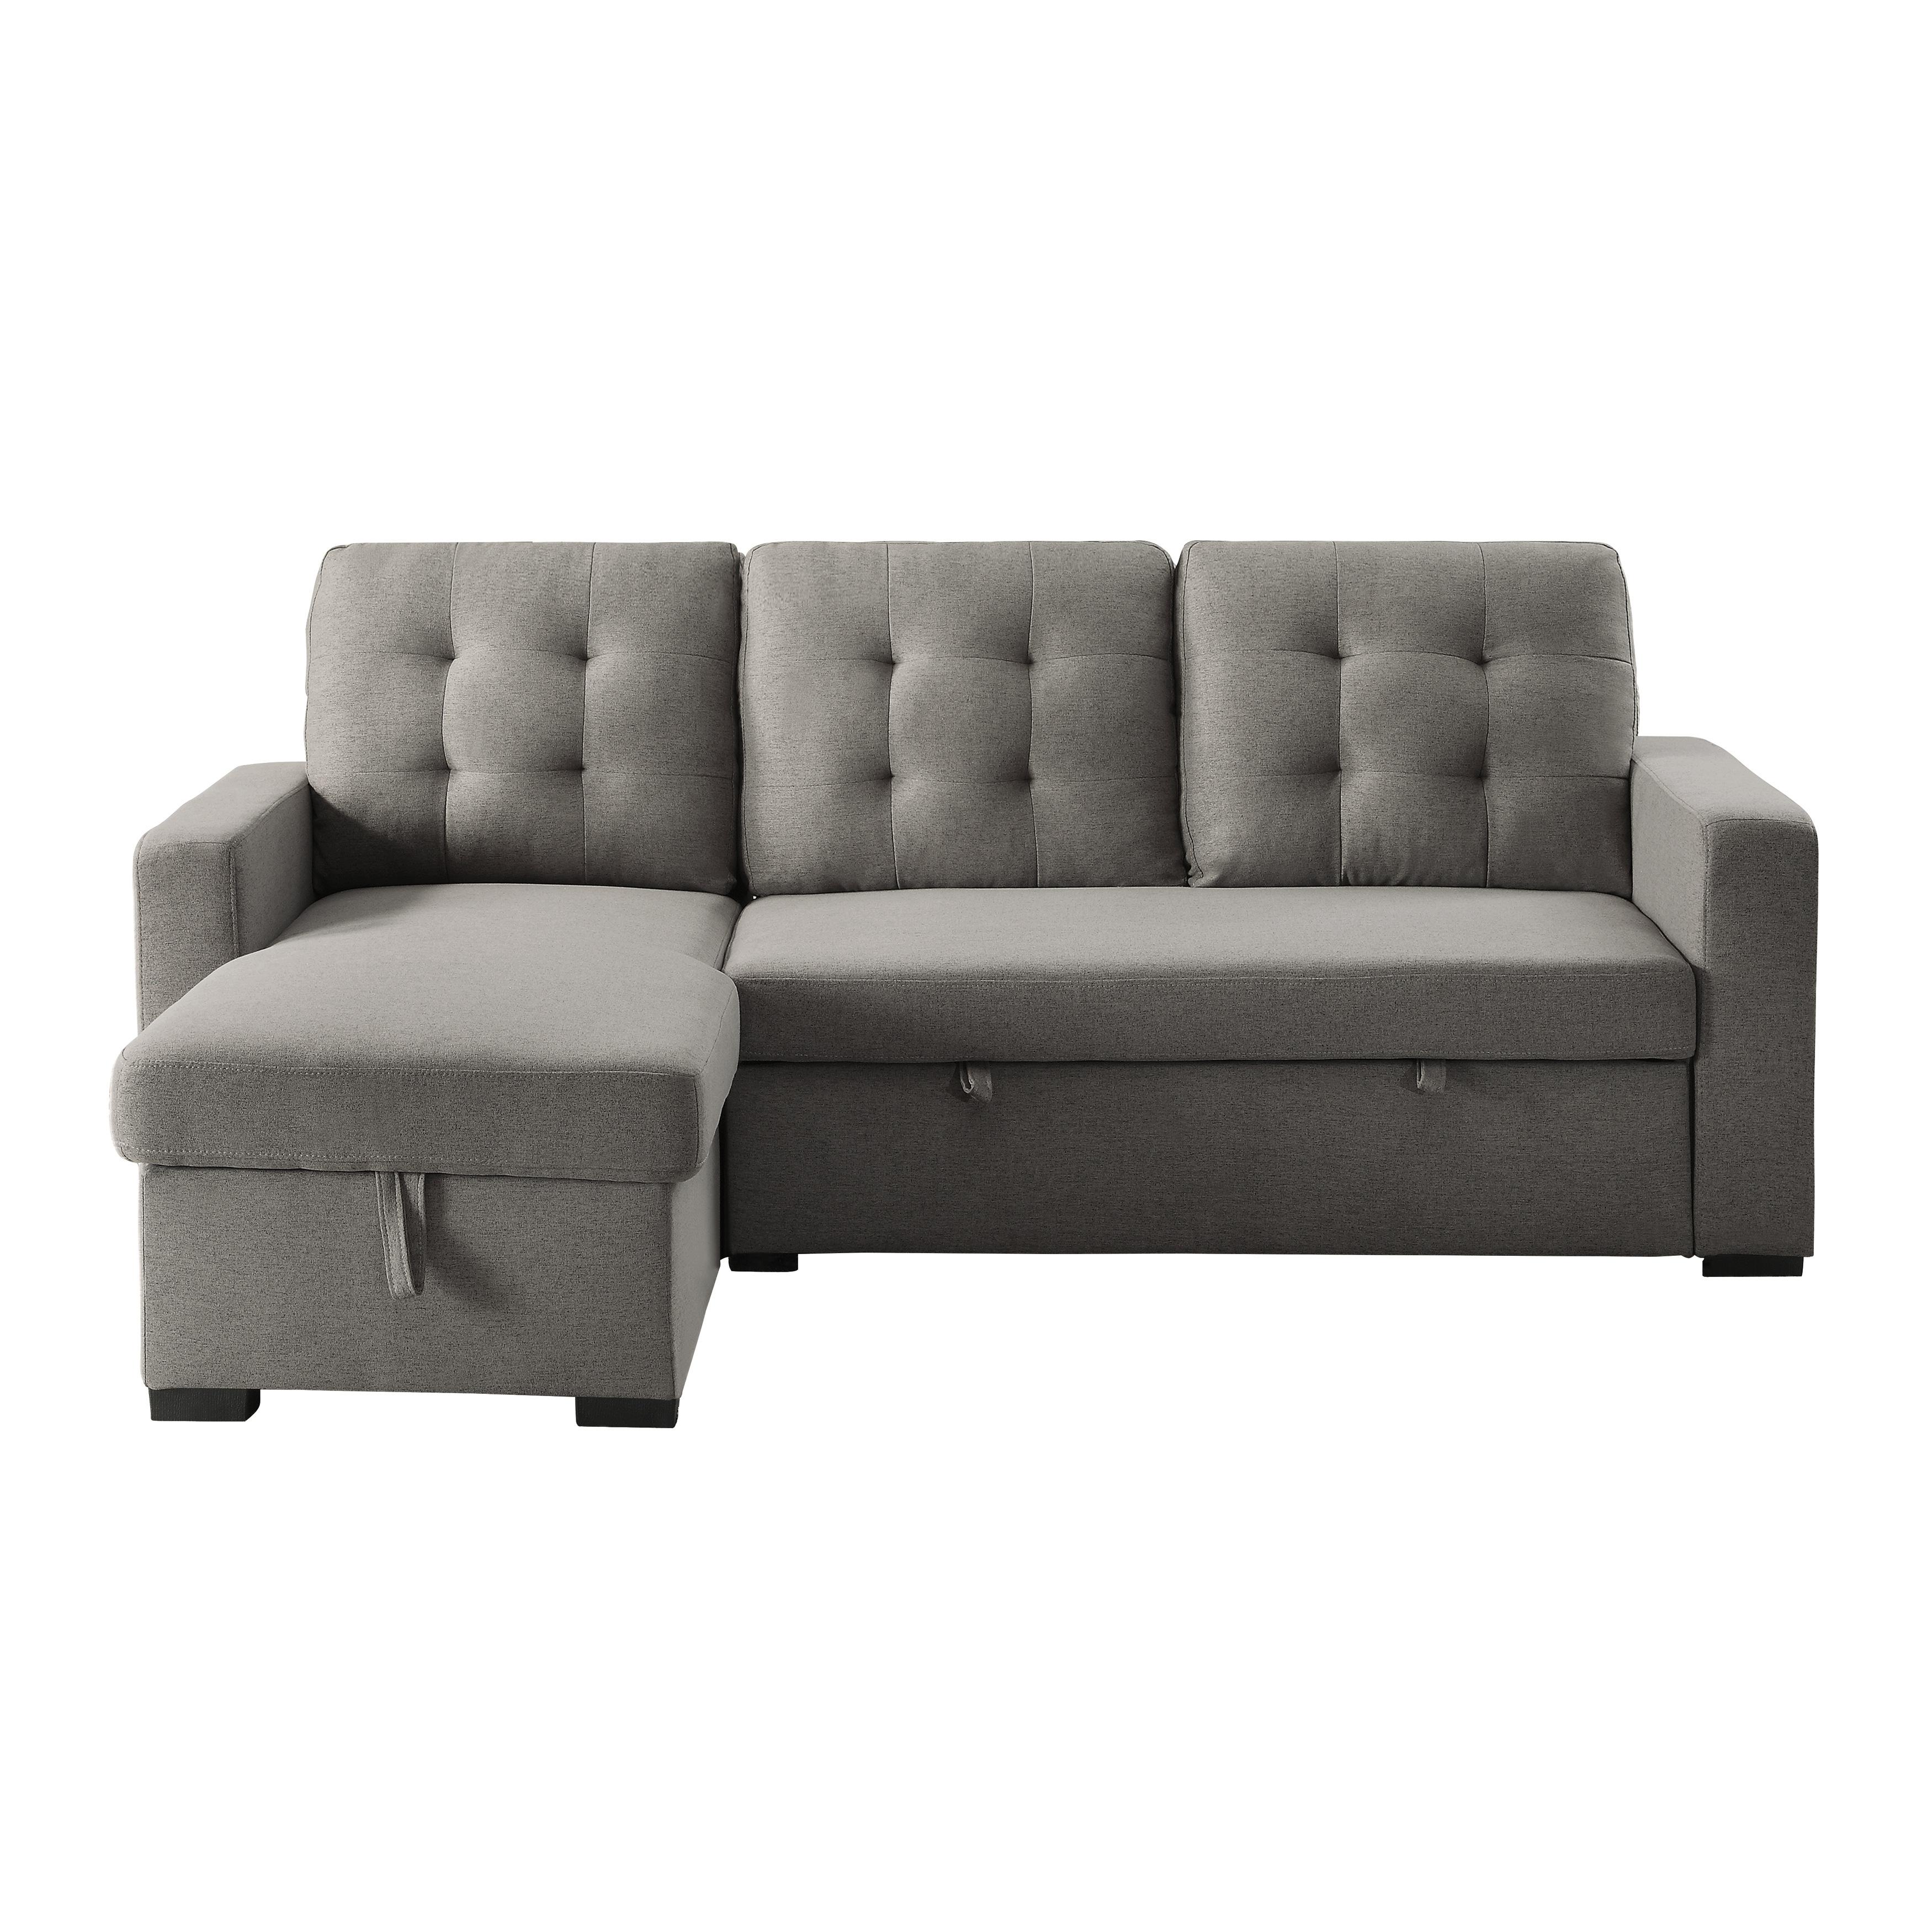 Contemporary Sectional Sofa 9314GY*SC Cornish 9314GY*SC in Gray 